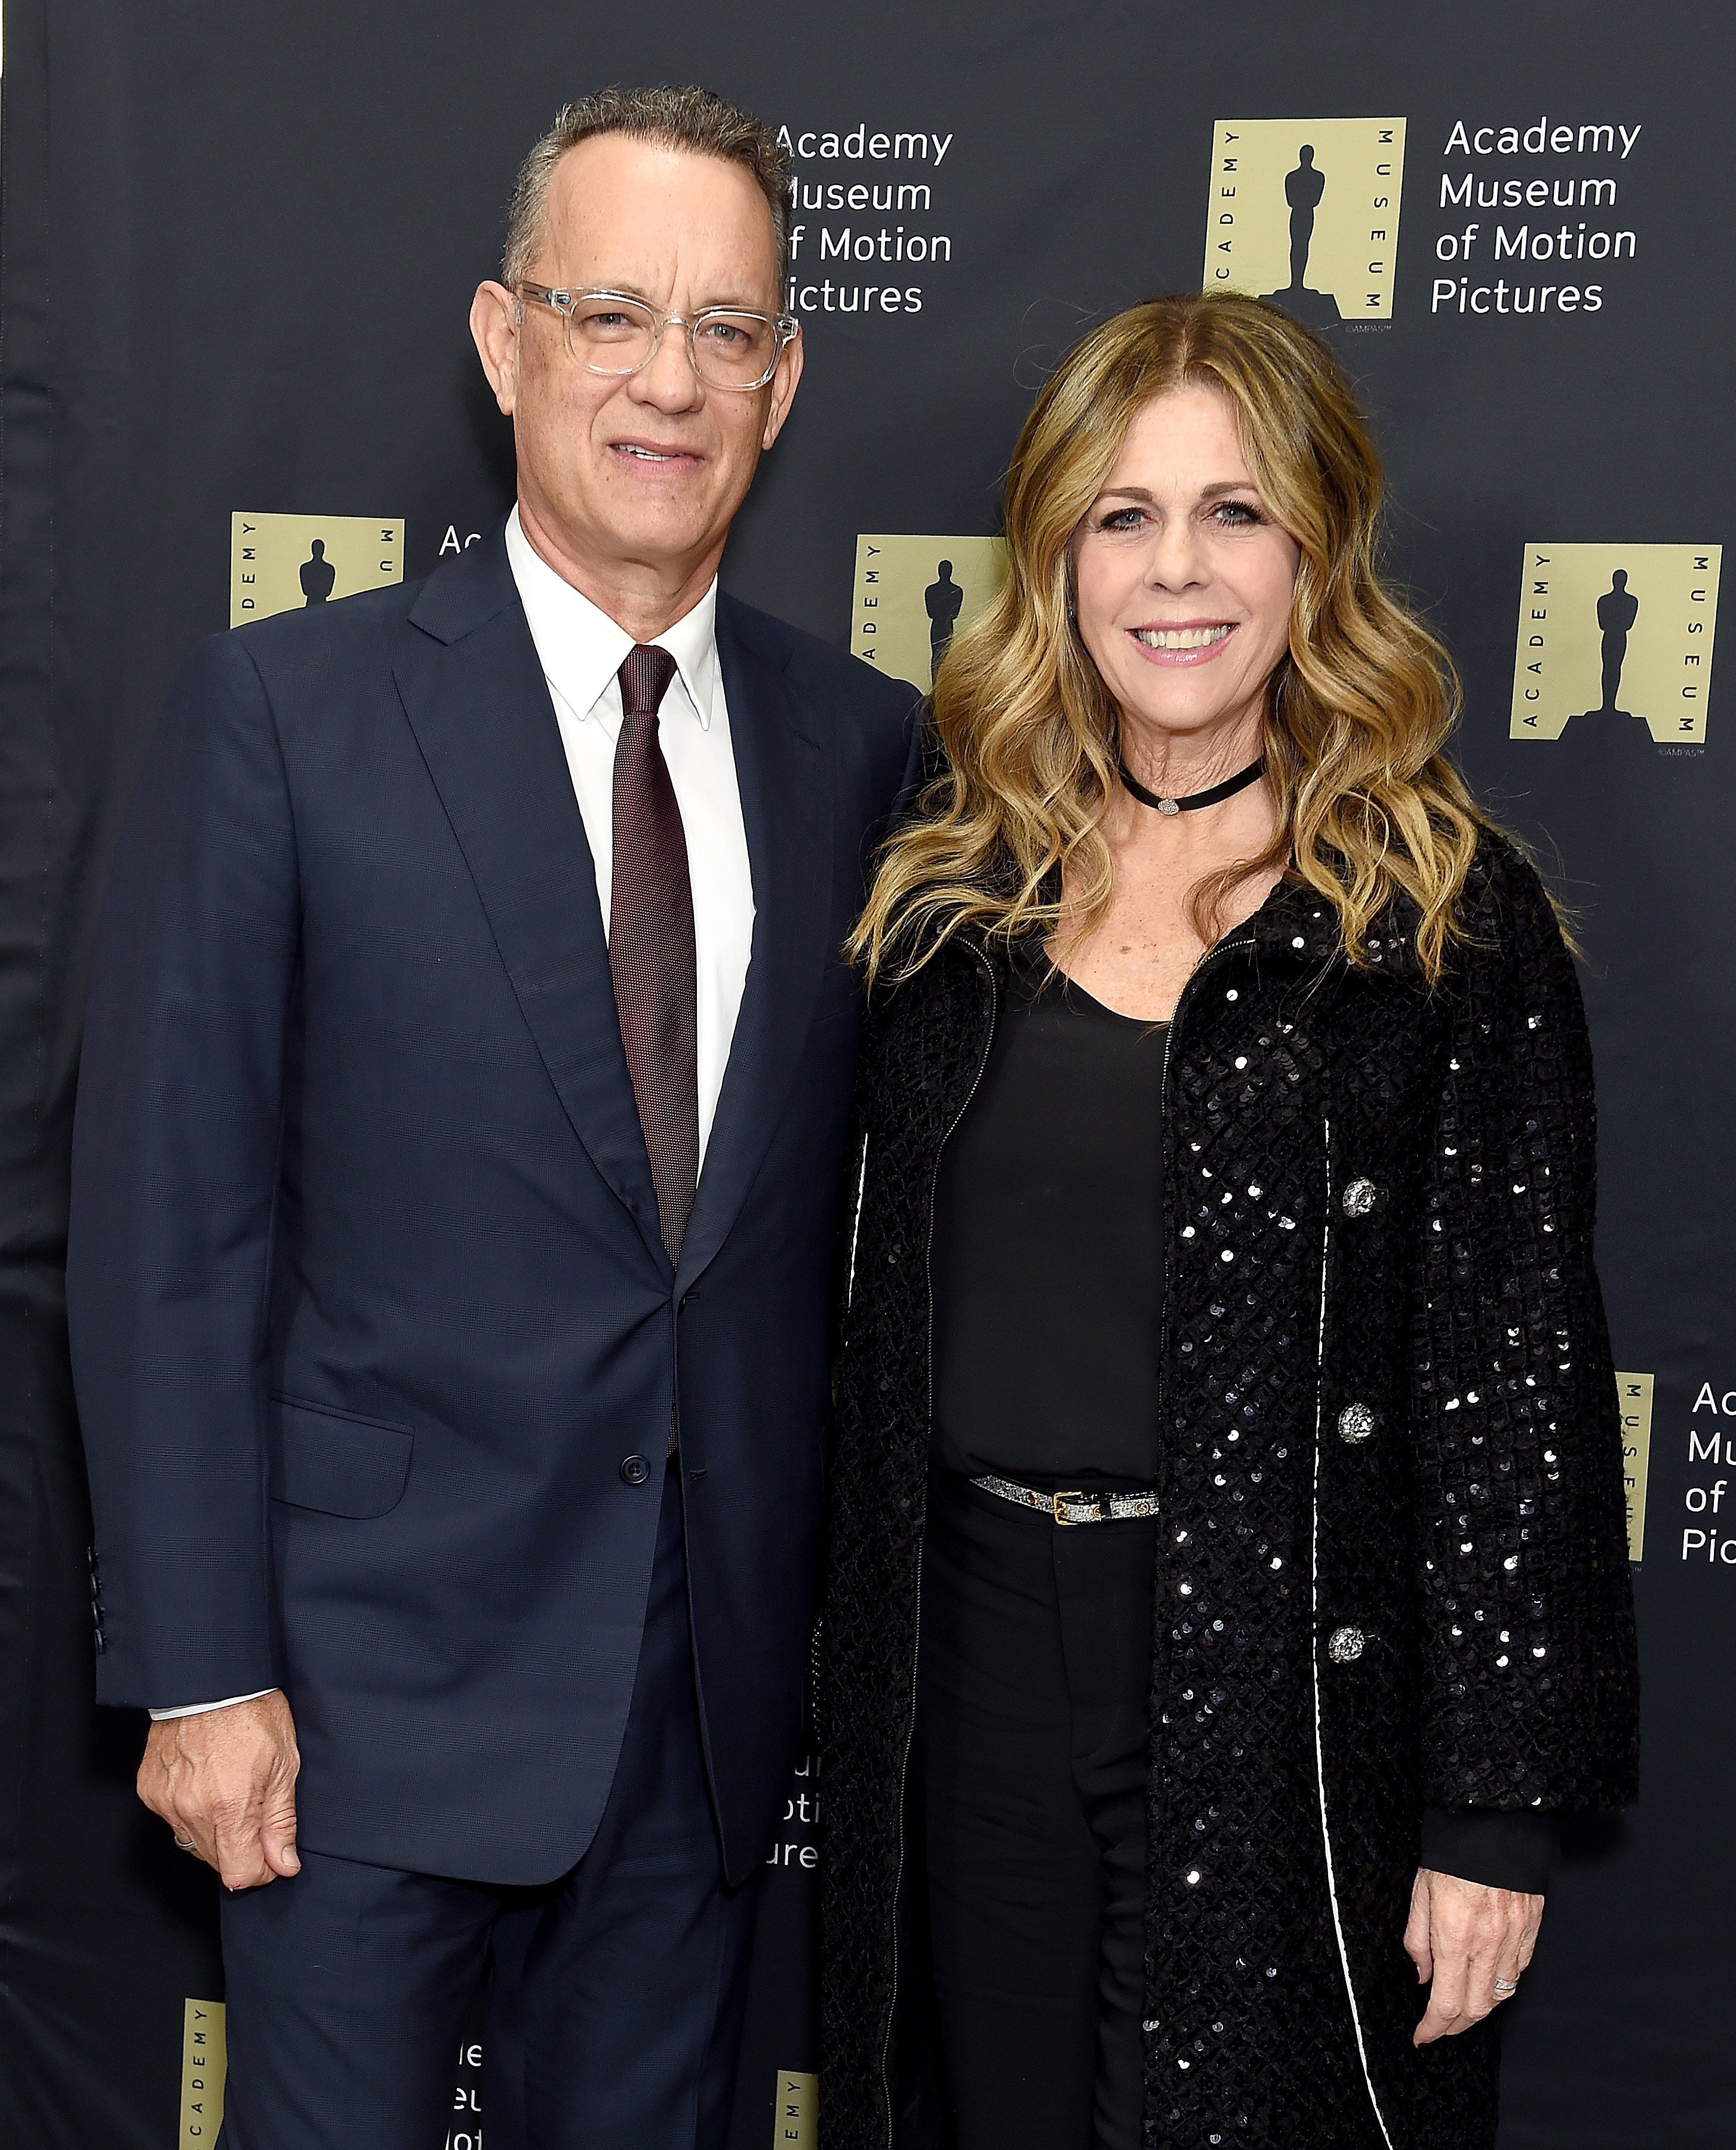 Tom Hanks and Rita Wilson attend the Unveiling of the Fully Restored Saban Building at Petersen Automotive Museum on December 4, 2018. | Photo: Getty Images.